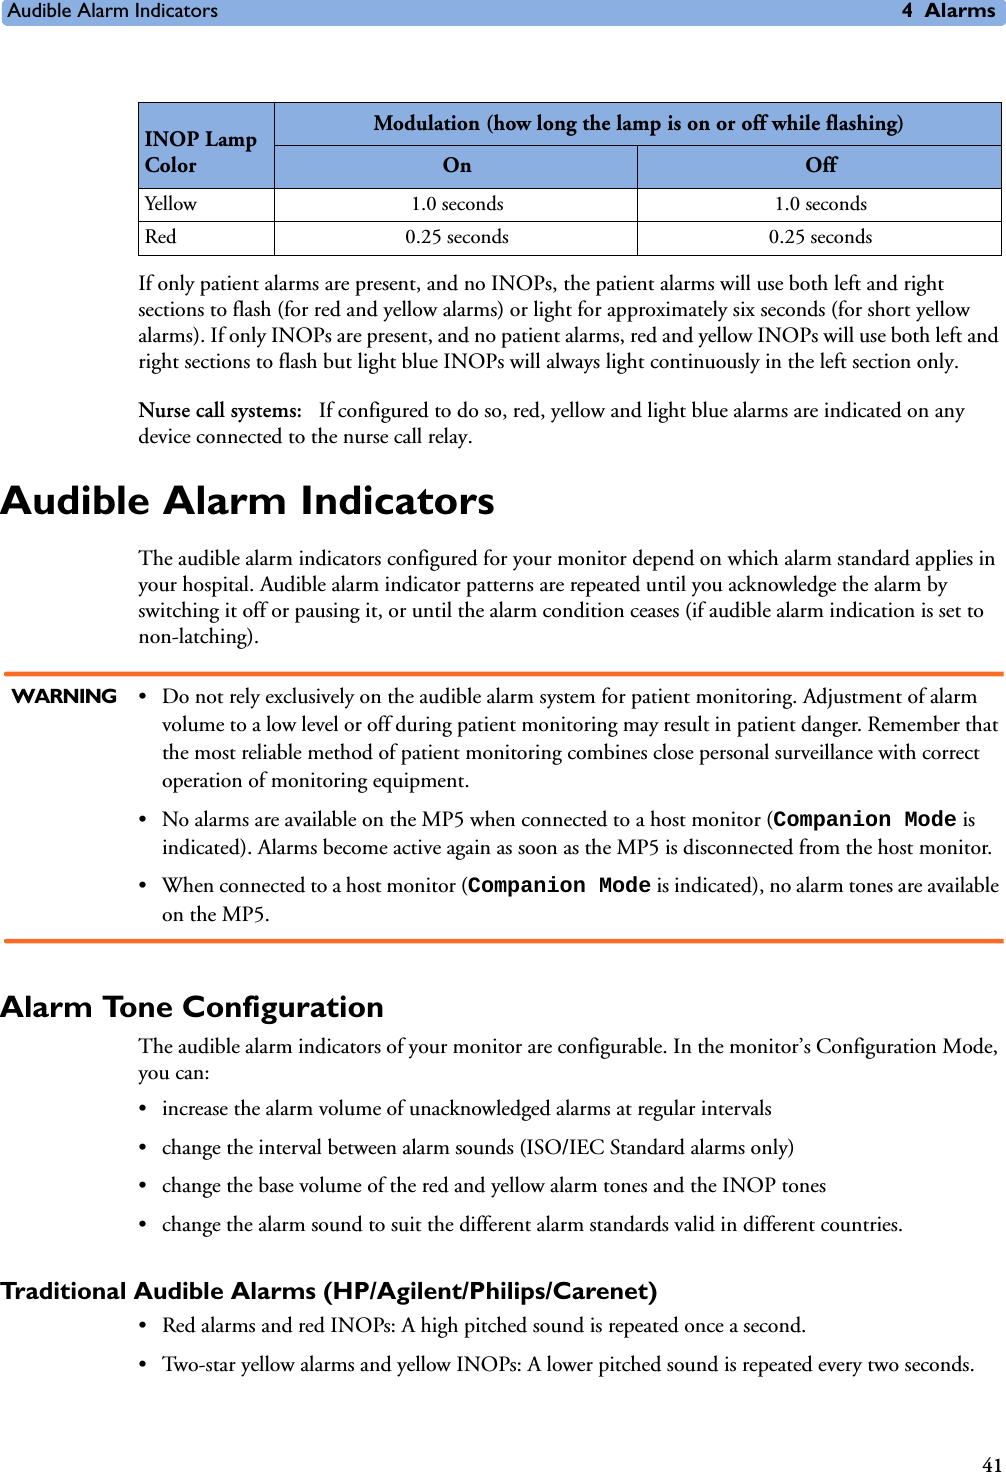 Audible Alarm Indicators 4Alarms41If only patient alarms are present, and no INOPs, the patient alarms will use both left and right sections to flash (for red and yellow alarms) or light for approximately six seconds (for short yellow alarms). If only INOPs are present, and no patient alarms, red and yellow INOPs will use both left and right sections to flash but light blue INOPs will always light continuously in the left section only.Nurse call systems:  If configured to do so, red, yellow and light blue alarms are indicated on any device connected to the nurse call relay.Audible Alarm Indicators The audible alarm indicators configured for your monitor depend on which alarm standard applies in your hospital. Audible alarm indicator patterns are repeated until you acknowledge the alarm by switching it off or pausing it, or until the alarm condition ceases (if audible alarm indication is set to non-latching).WARNING • Do not rely exclusively on the audible alarm system for patient monitoring. Adjustment of alarm volume to a low level or off during patient monitoring may result in patient danger. Remember that the most reliable method of patient monitoring combines close personal surveillance with correct operation of monitoring equipment.• No alarms are available on the MP5 when connected to a host monitor (Companion Mode is indicated). Alarms become active again as soon as the MP5 is disconnected from the host monitor.• When connected to a host monitor (Companion Mode is indicated), no alarm tones are available on the MP5.Alarm Tone Configuration The audible alarm indicators of your monitor are configurable. In the monitor’s Configuration Mode, you can:• increase the alarm volume of unacknowledged alarms at regular intervals• change the interval between alarm sounds (ISO/IEC Standard alarms only)• change the base volume of the red and yellow alarm tones and the INOP tones• change the alarm sound to suit the different alarm standards valid in different countries.Traditional Audible Alarms (HP/Agilent/Philips/Carenet)• Red alarms and red INOPs: A high pitched sound is repeated once a second. • Two-star yellow alarms and yellow INOPs: A lower pitched sound is repeated every two seconds.INOP Lamp ColorModulation (how long the lamp is on or off while flashing)On OffYellow 1.0 seconds 1.0 secondsRed 0.25 seconds 0.25 seconds